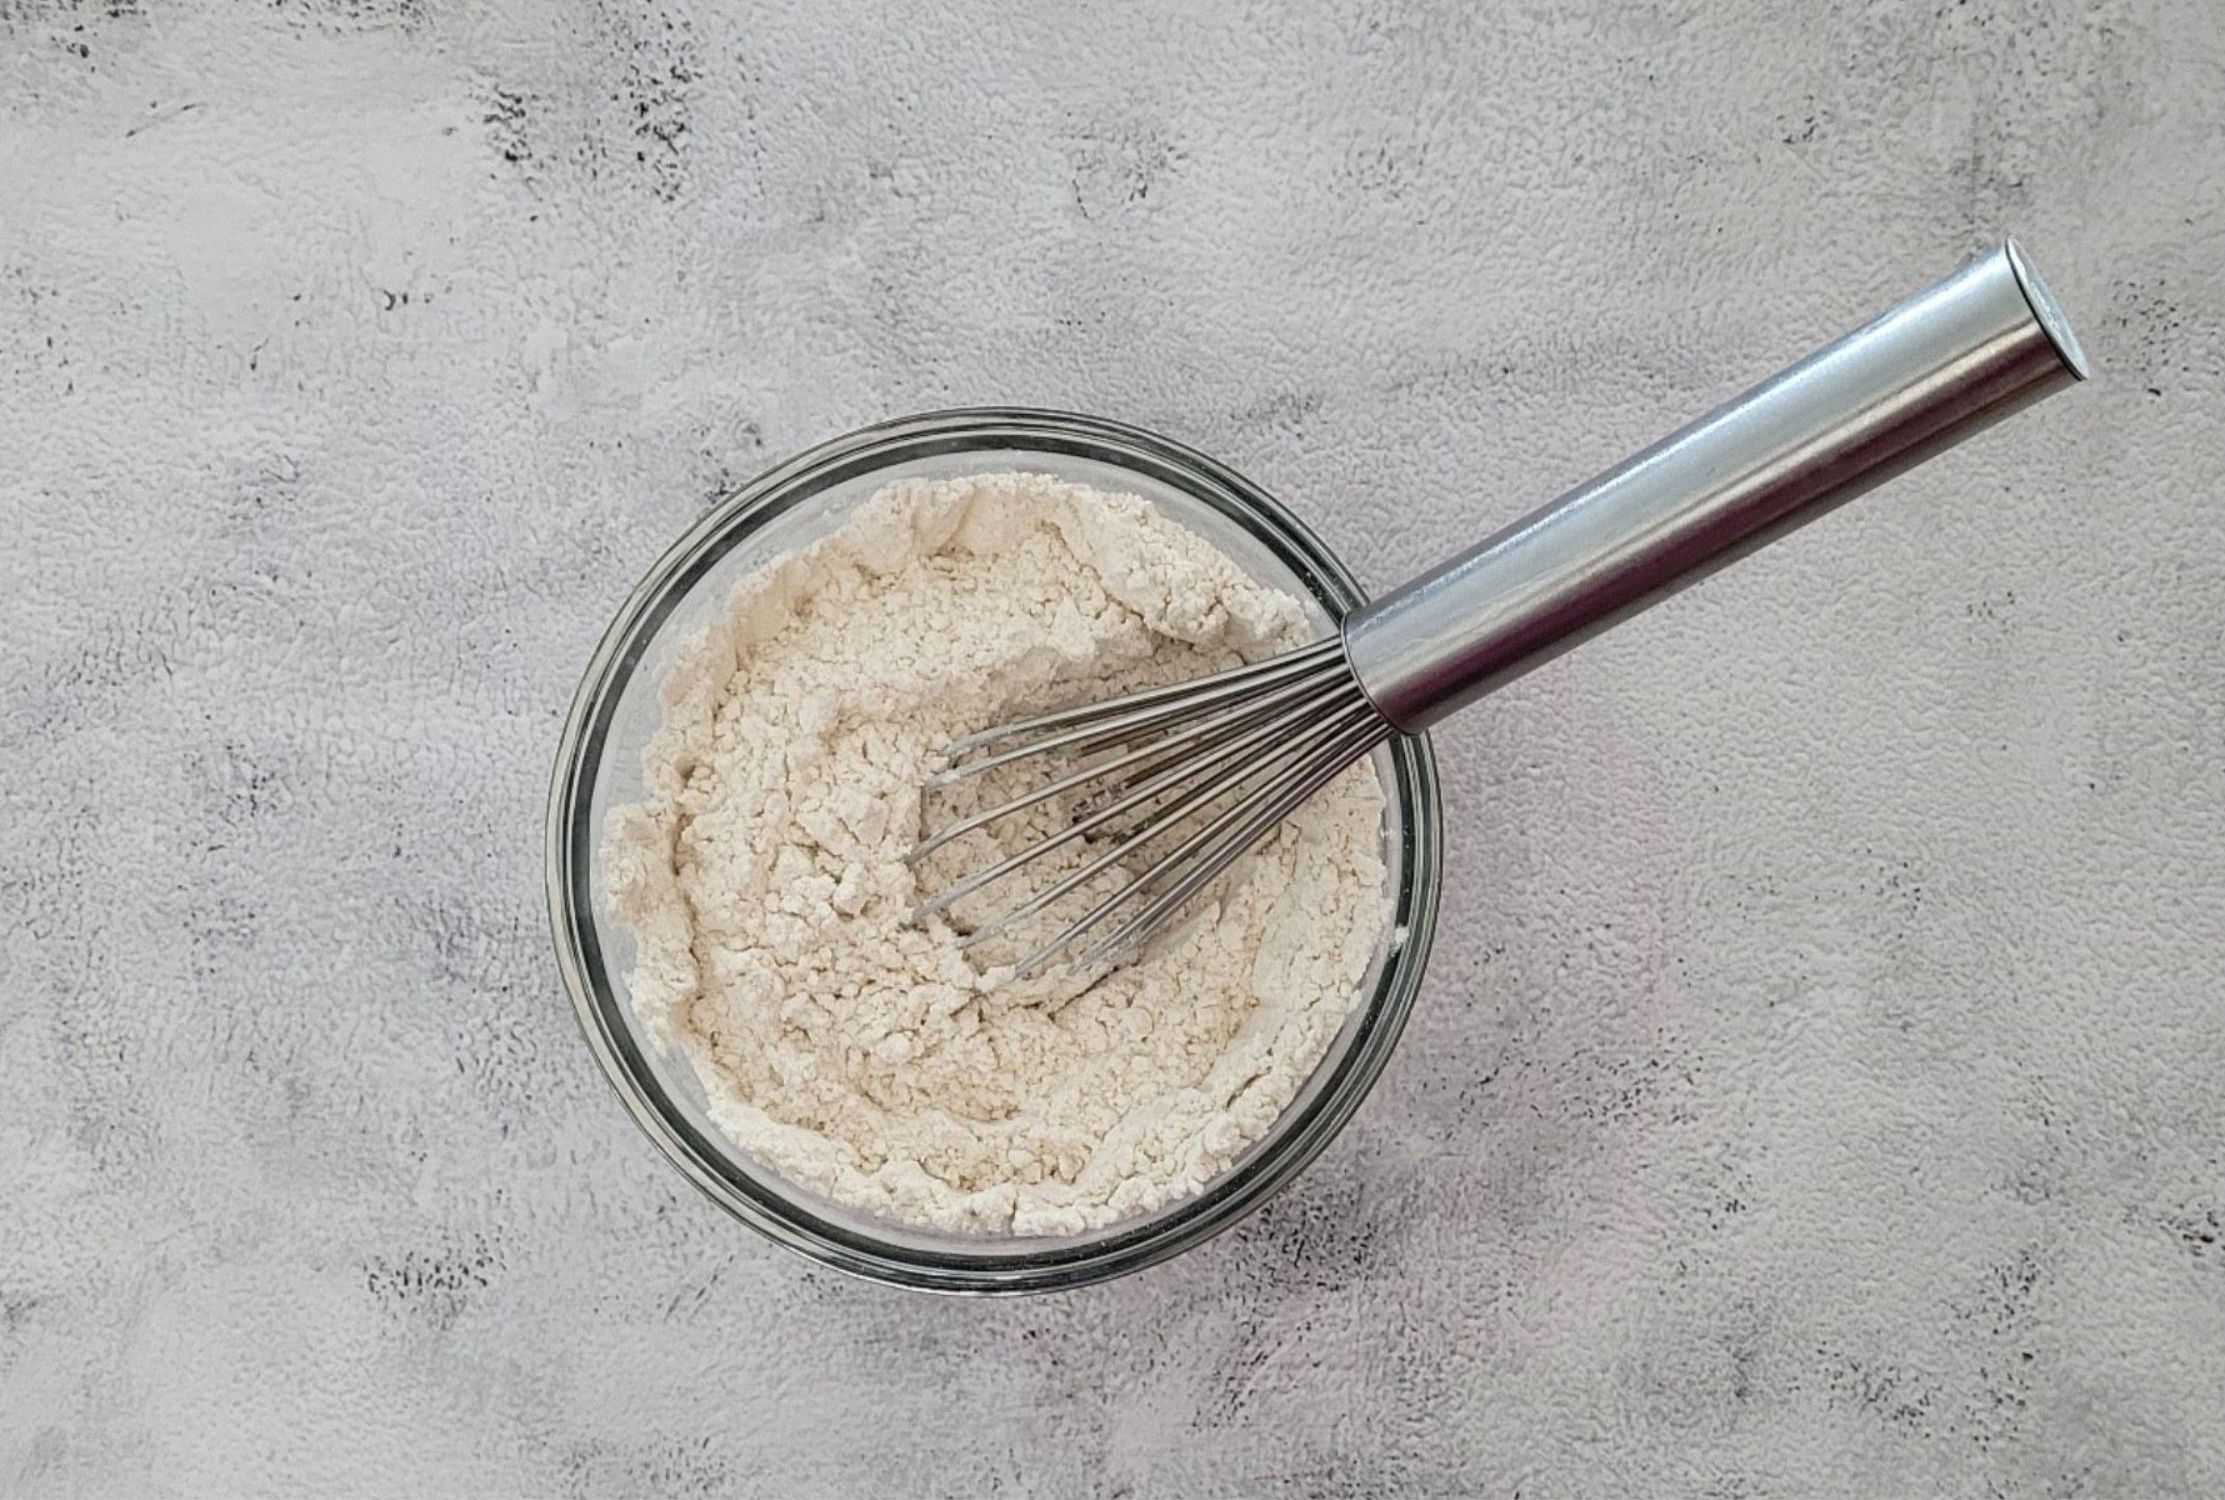 flour, baking soda, baking powder and salt whisked together in a bowl